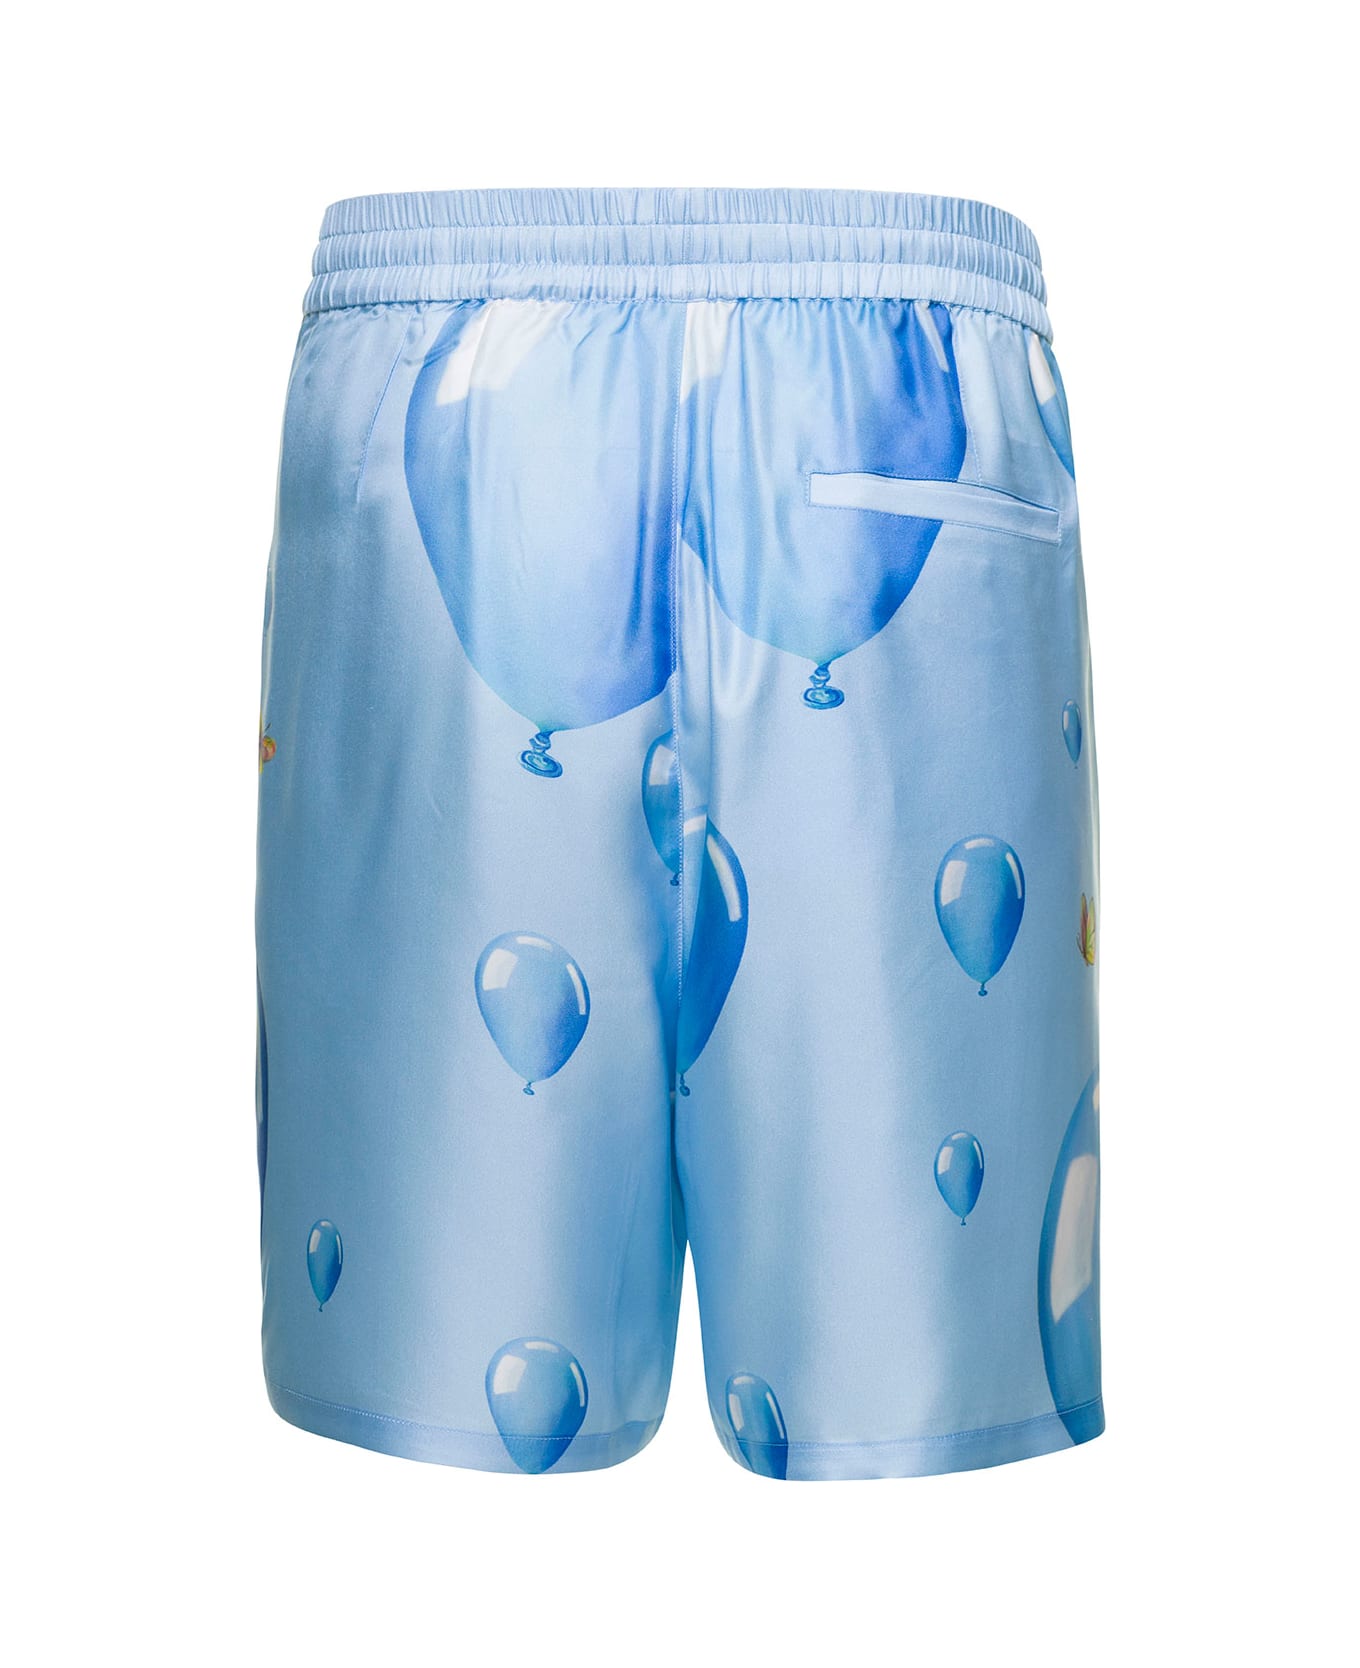 3.Paradis Light-blue Shorts With Balloon Print All-over In Polyester Man - Light blue